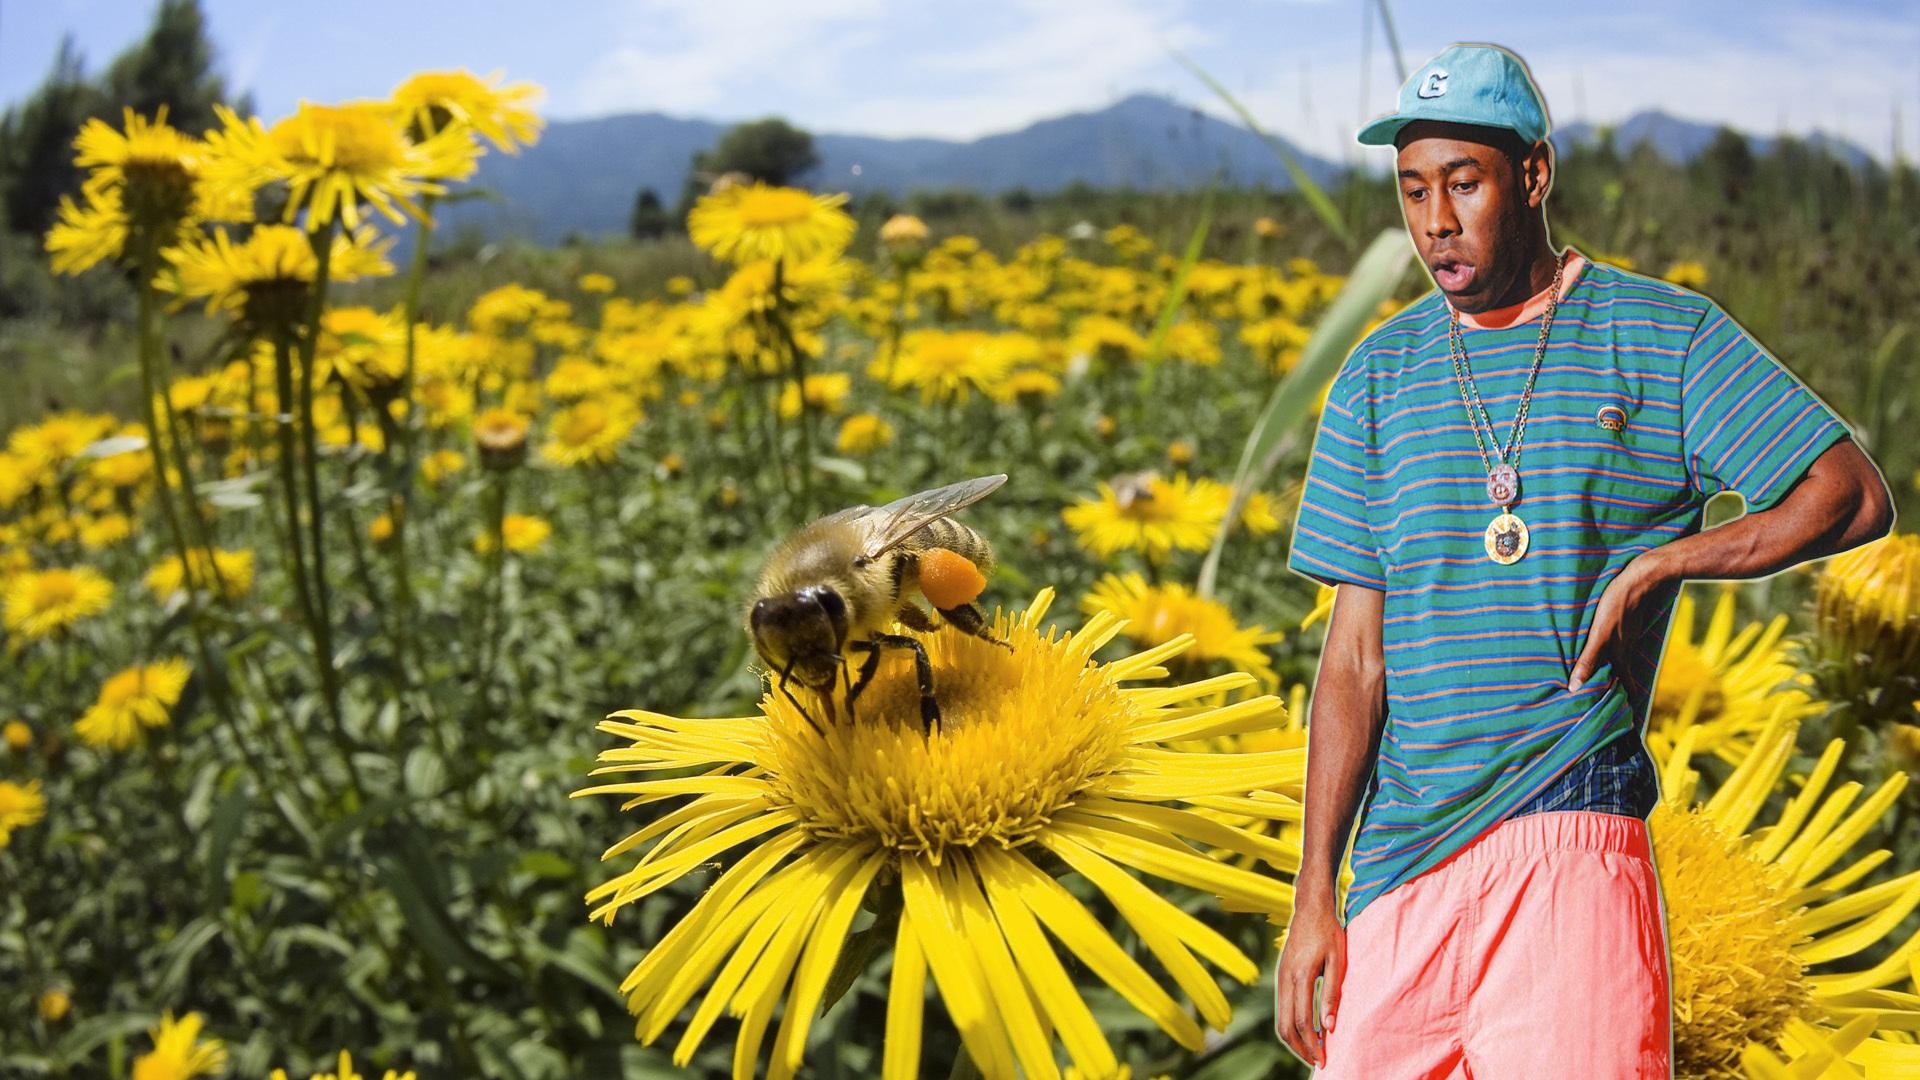 I made a Tyler the Creator Wallpaper